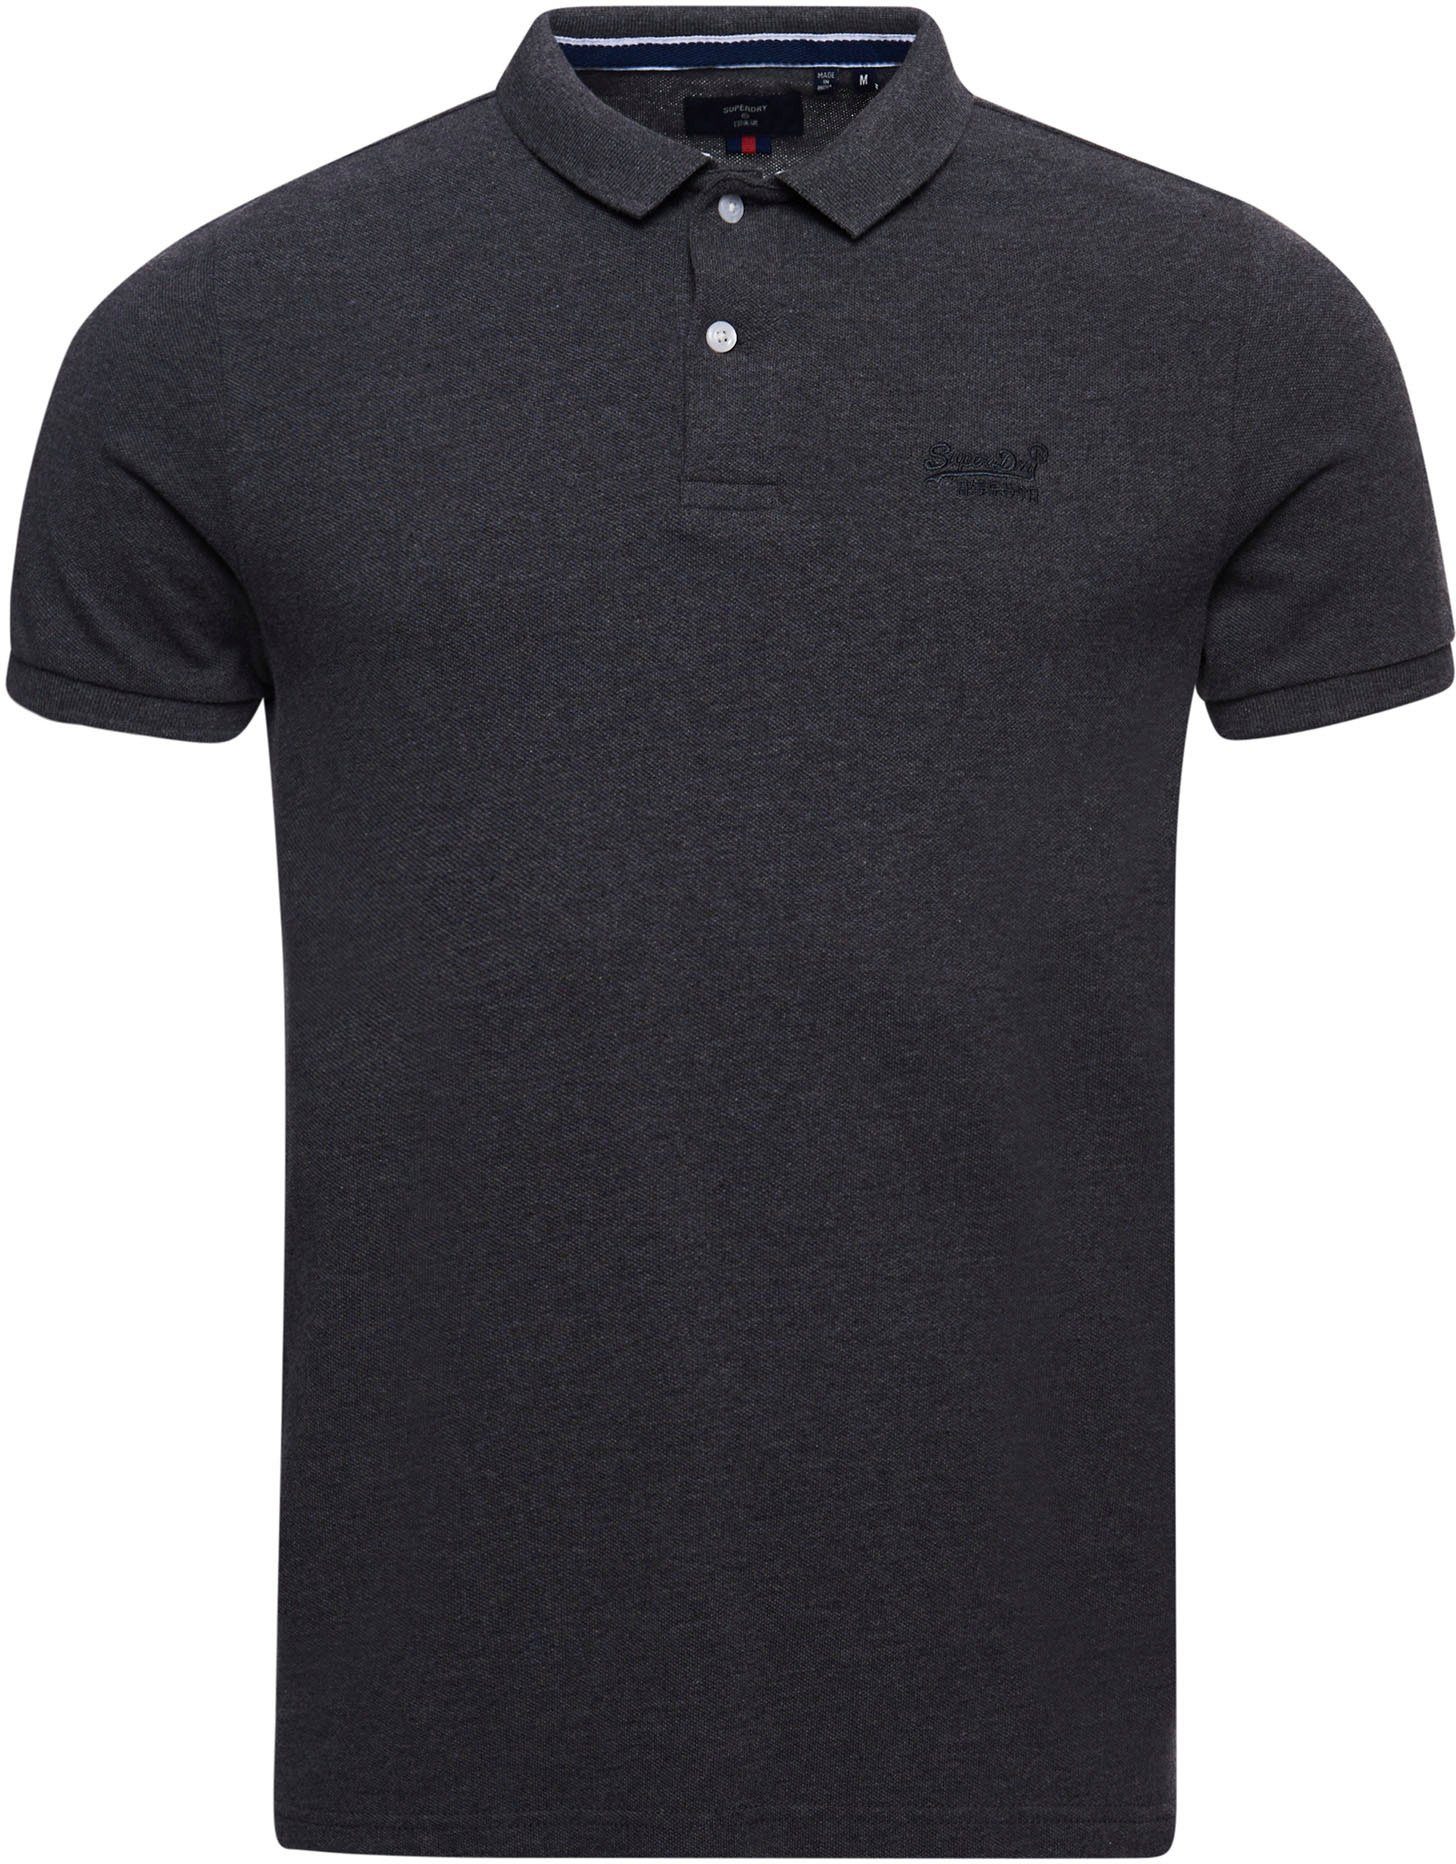 Superdry Poloshirt CLASSIC charcoal marl POLO rich PIQUE